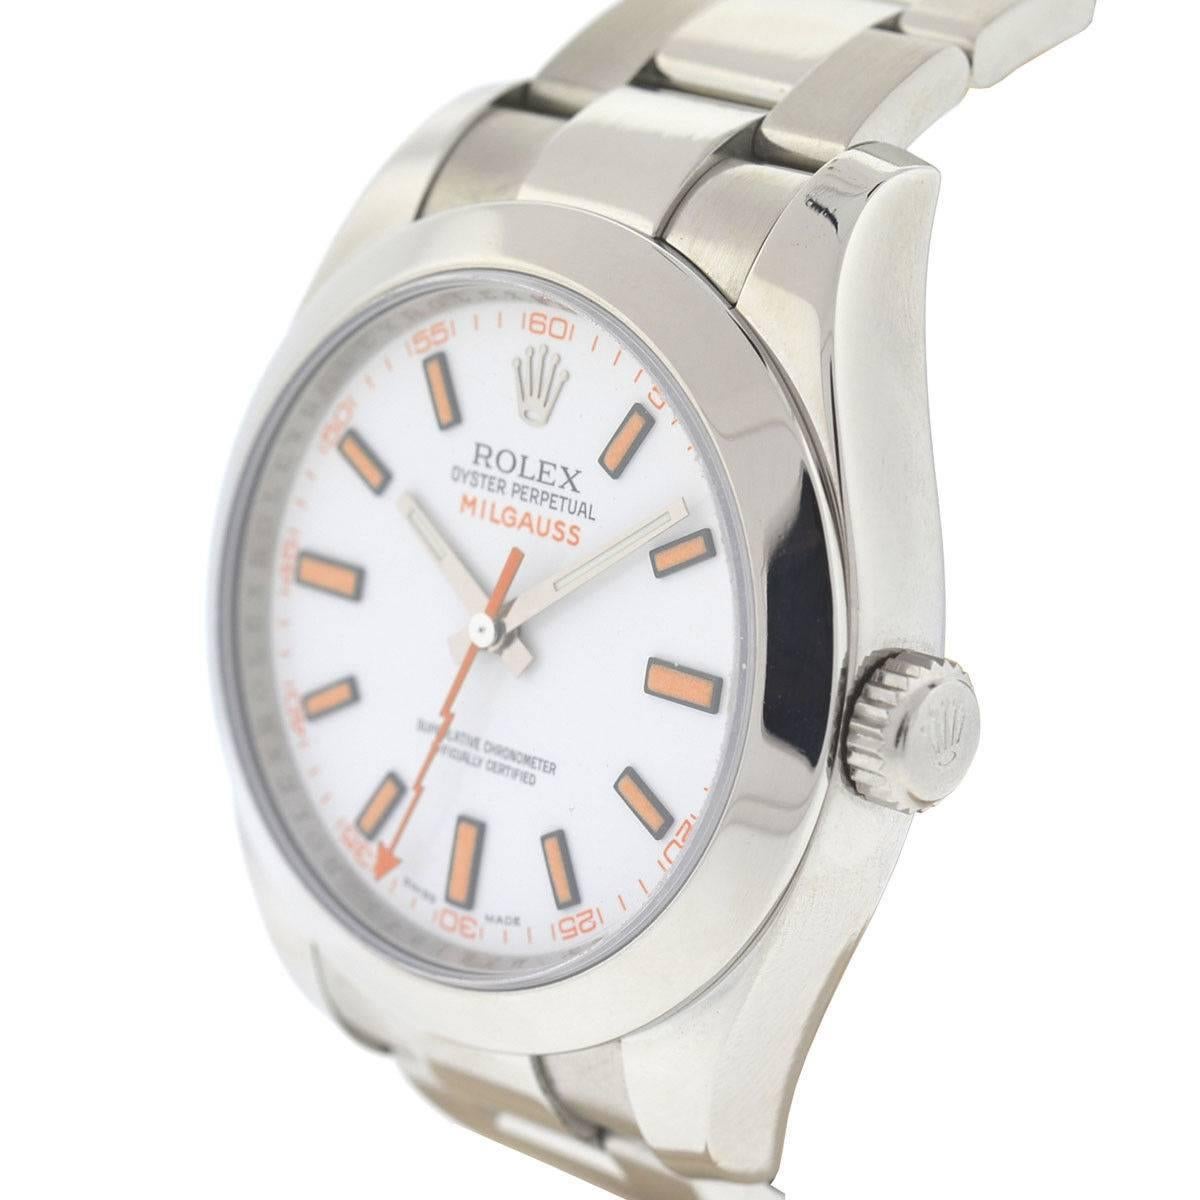 Company - Rolex
Style - Dress/Formal
Model - Milgauss
Reference Number - 116400 